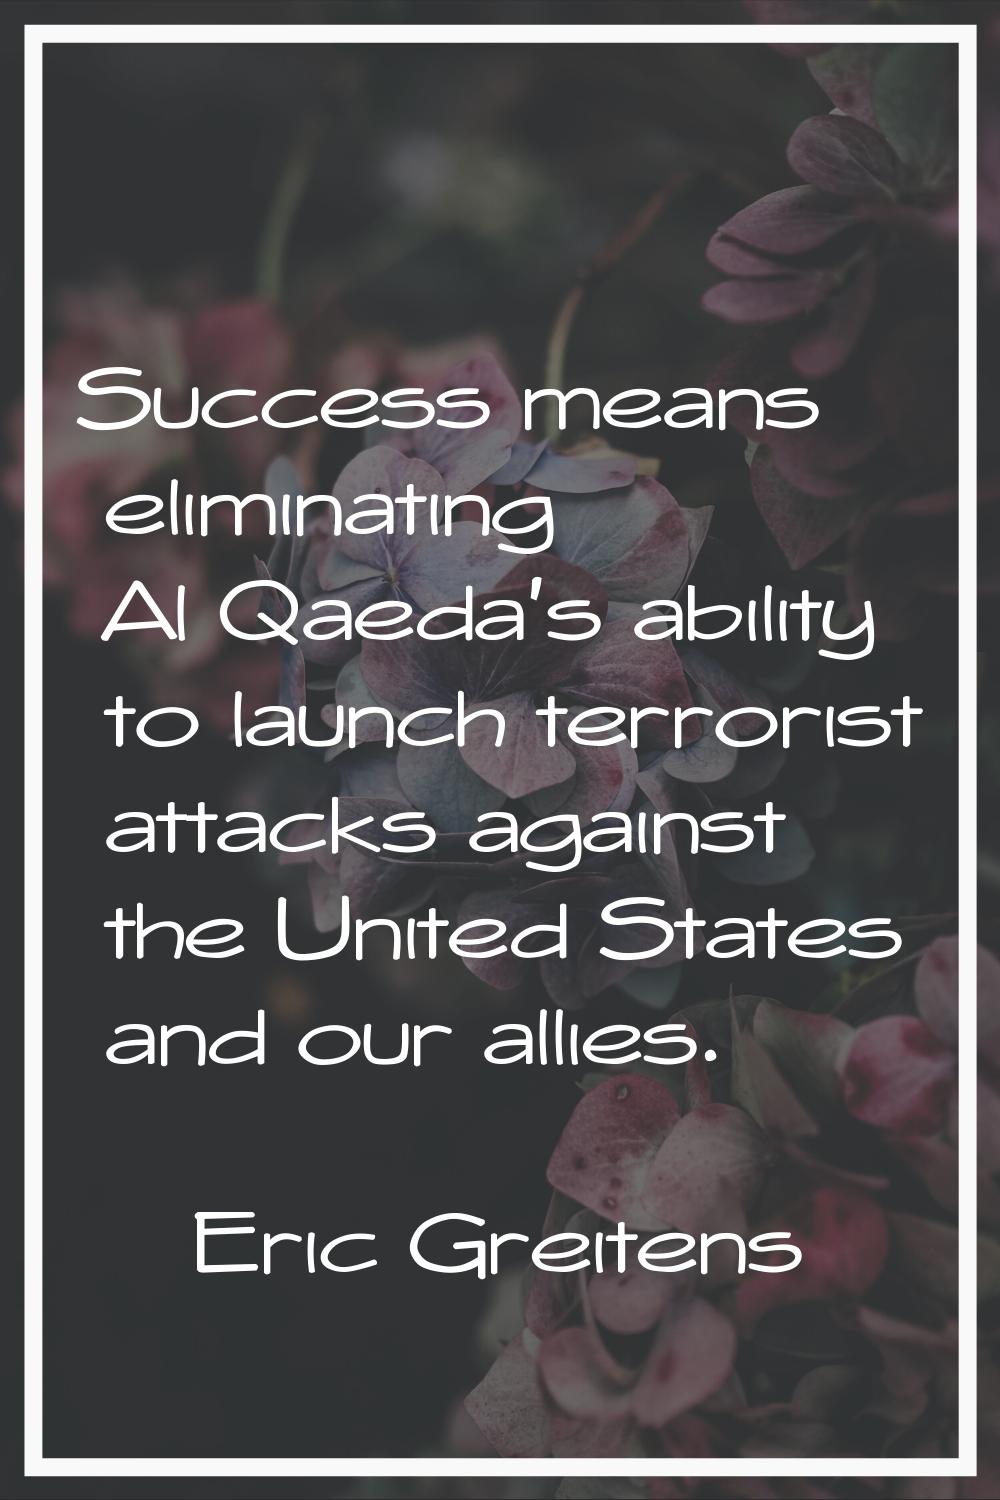 Success means eliminating Al Qaeda's ability to launch terrorist attacks against the United States 